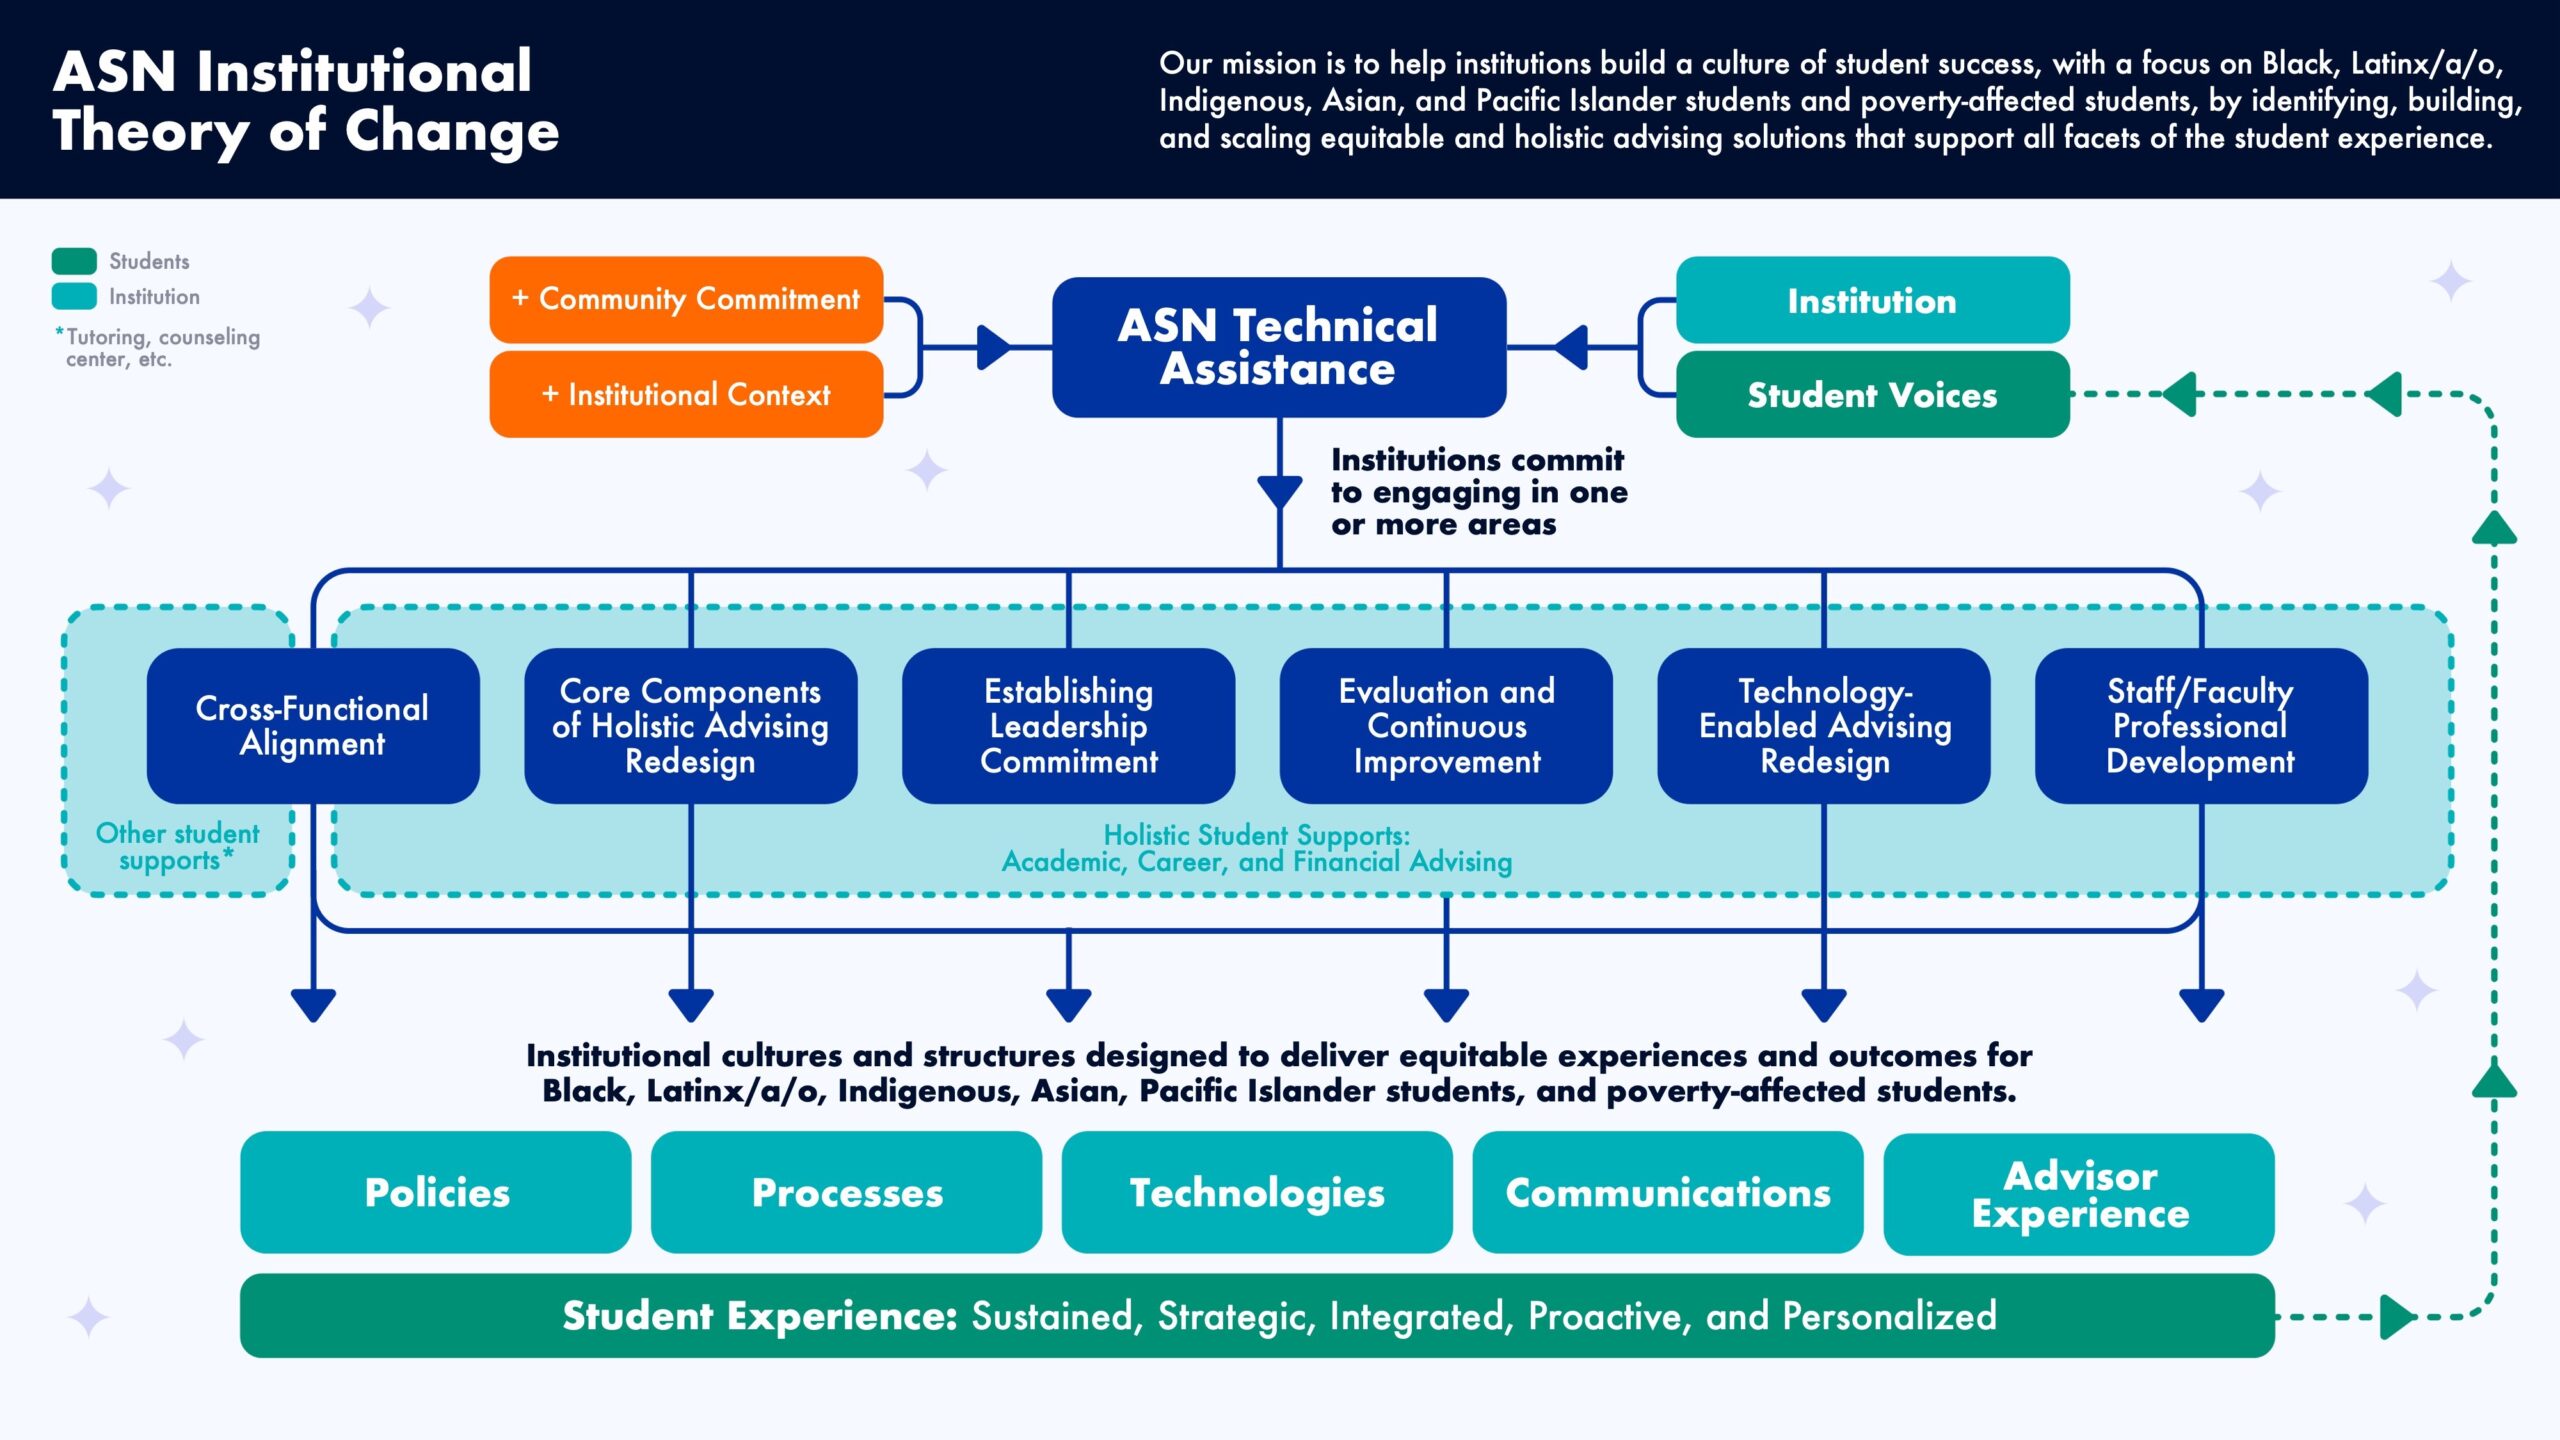 ASN theory of change depicted in a flow chart integrating ASN technical assistance, institutional commitments, and structures to be designed, showing impact on student experience and the continuous evolution of this work